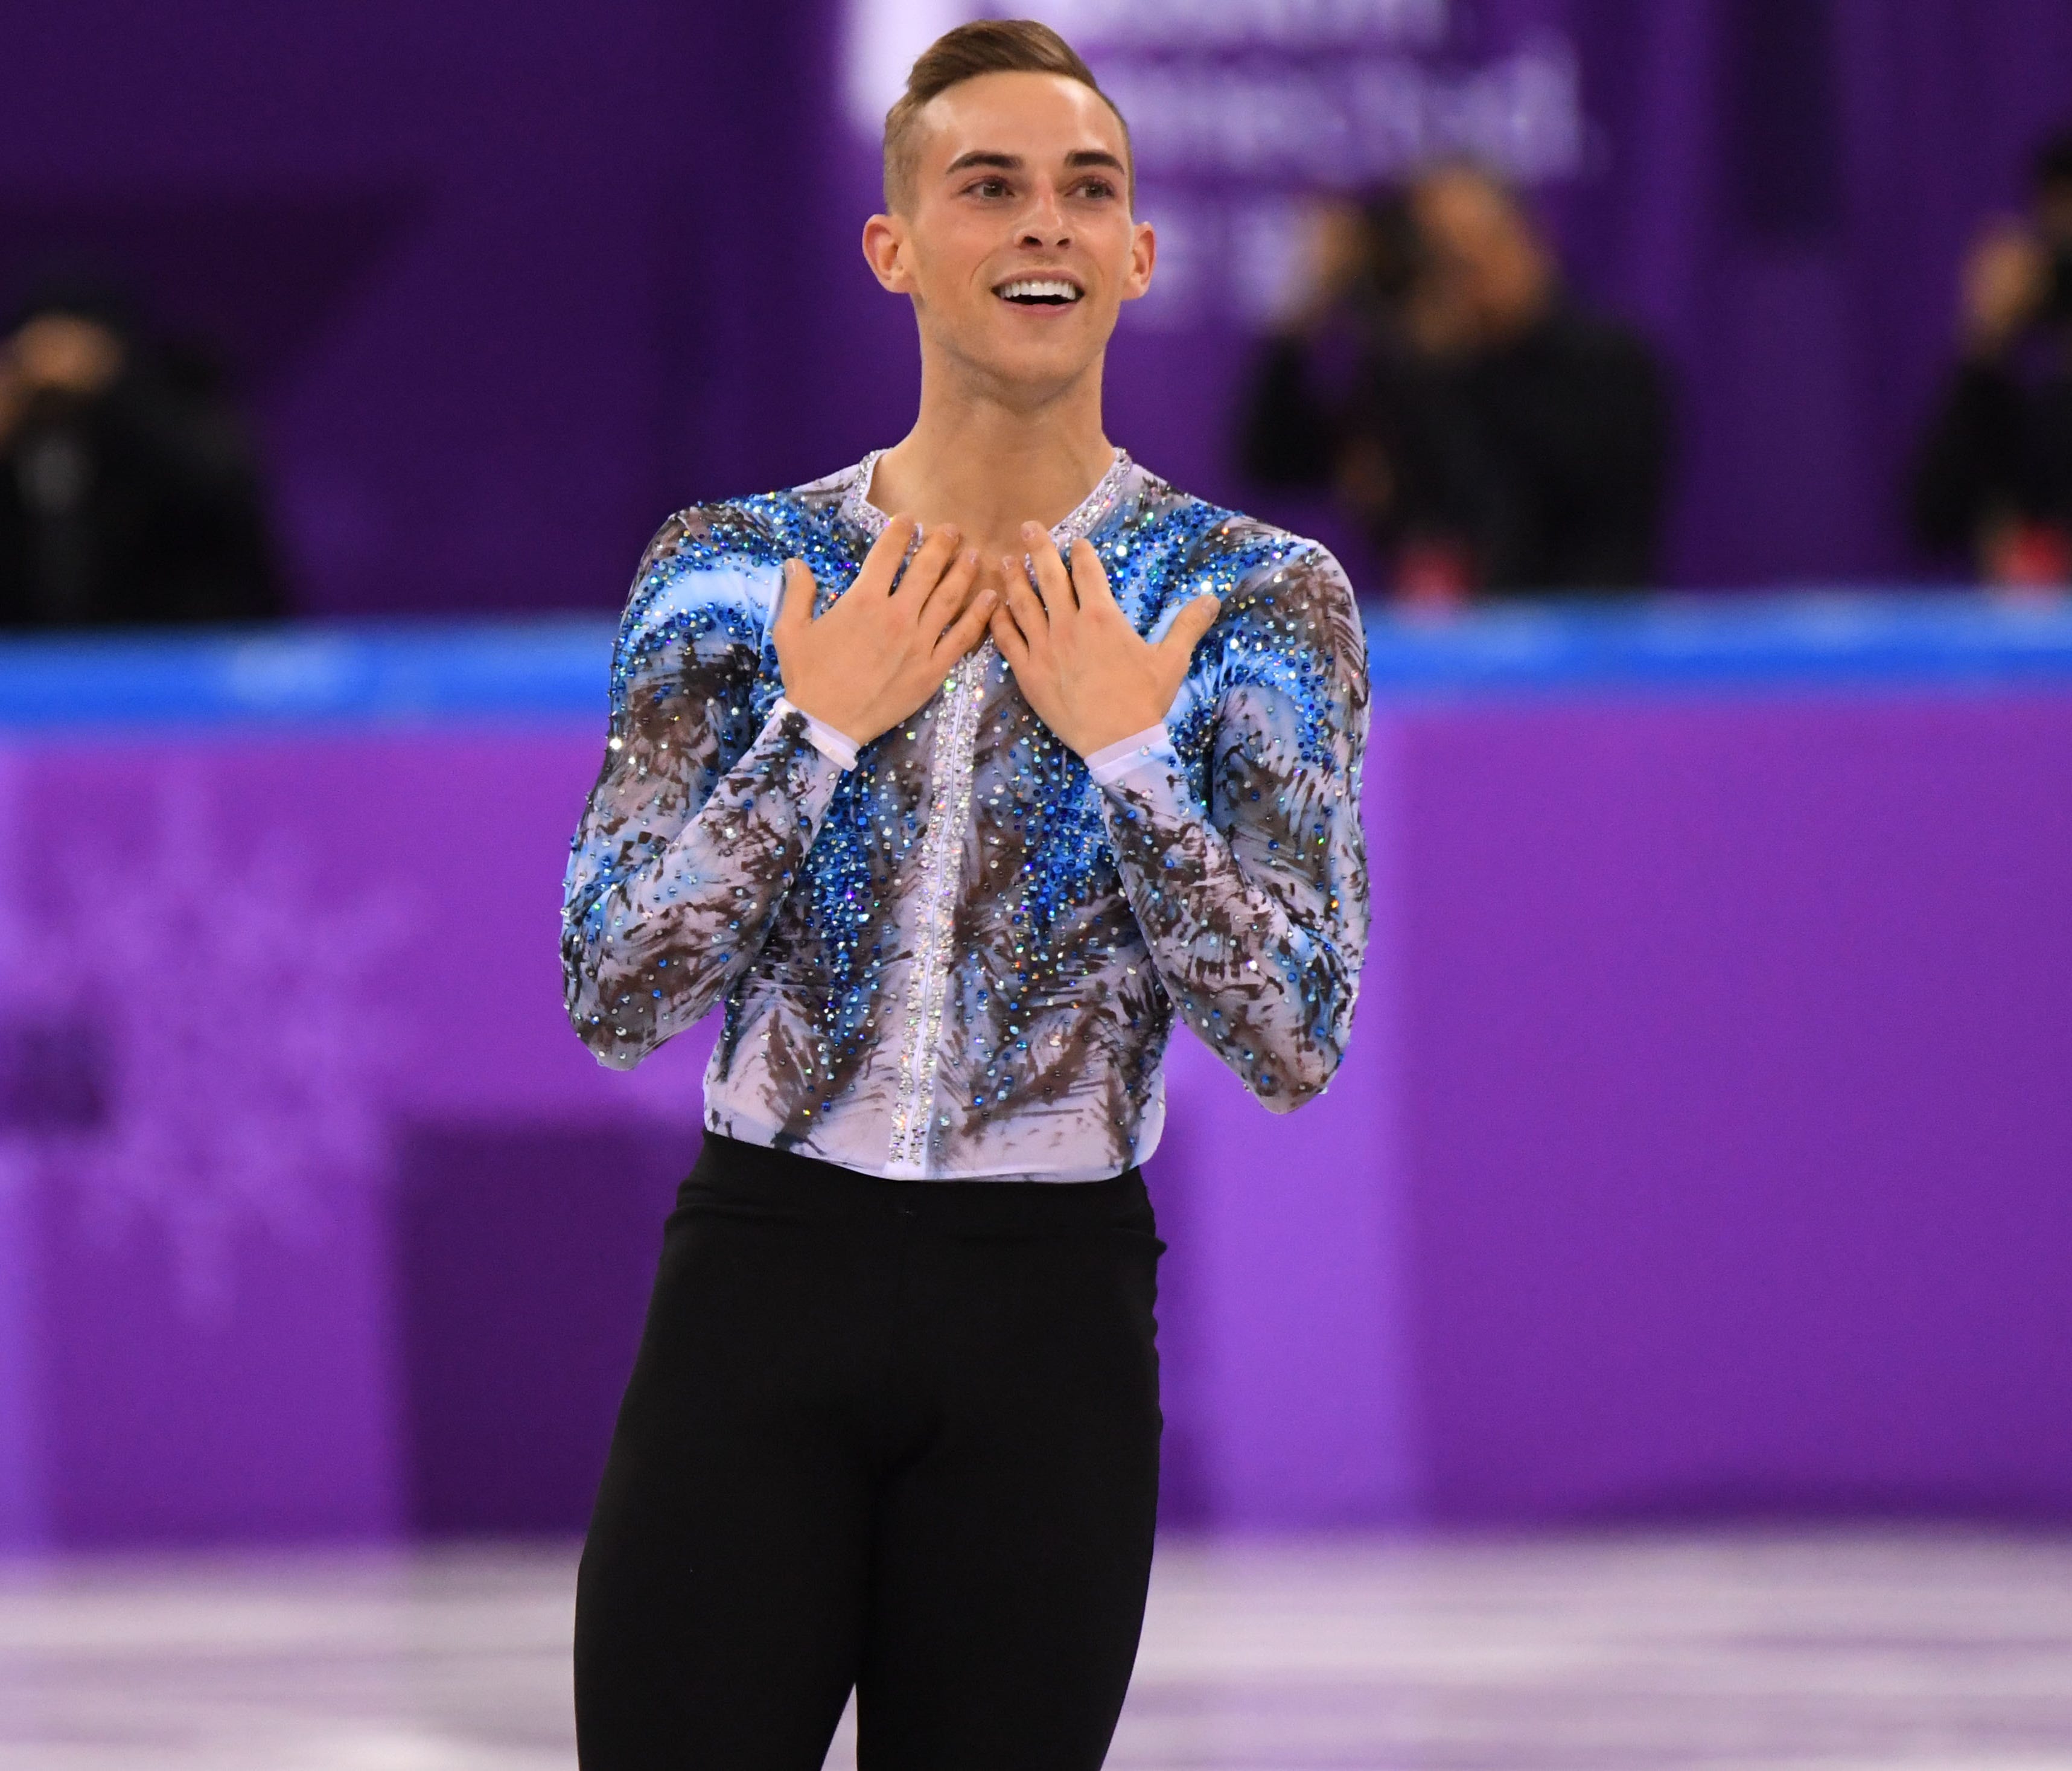 Adam Rippon (USA) performs in the figure skating single free event during the Pyeongchang 2018 Olympic Winter Games at Gangneung Ice Arena.